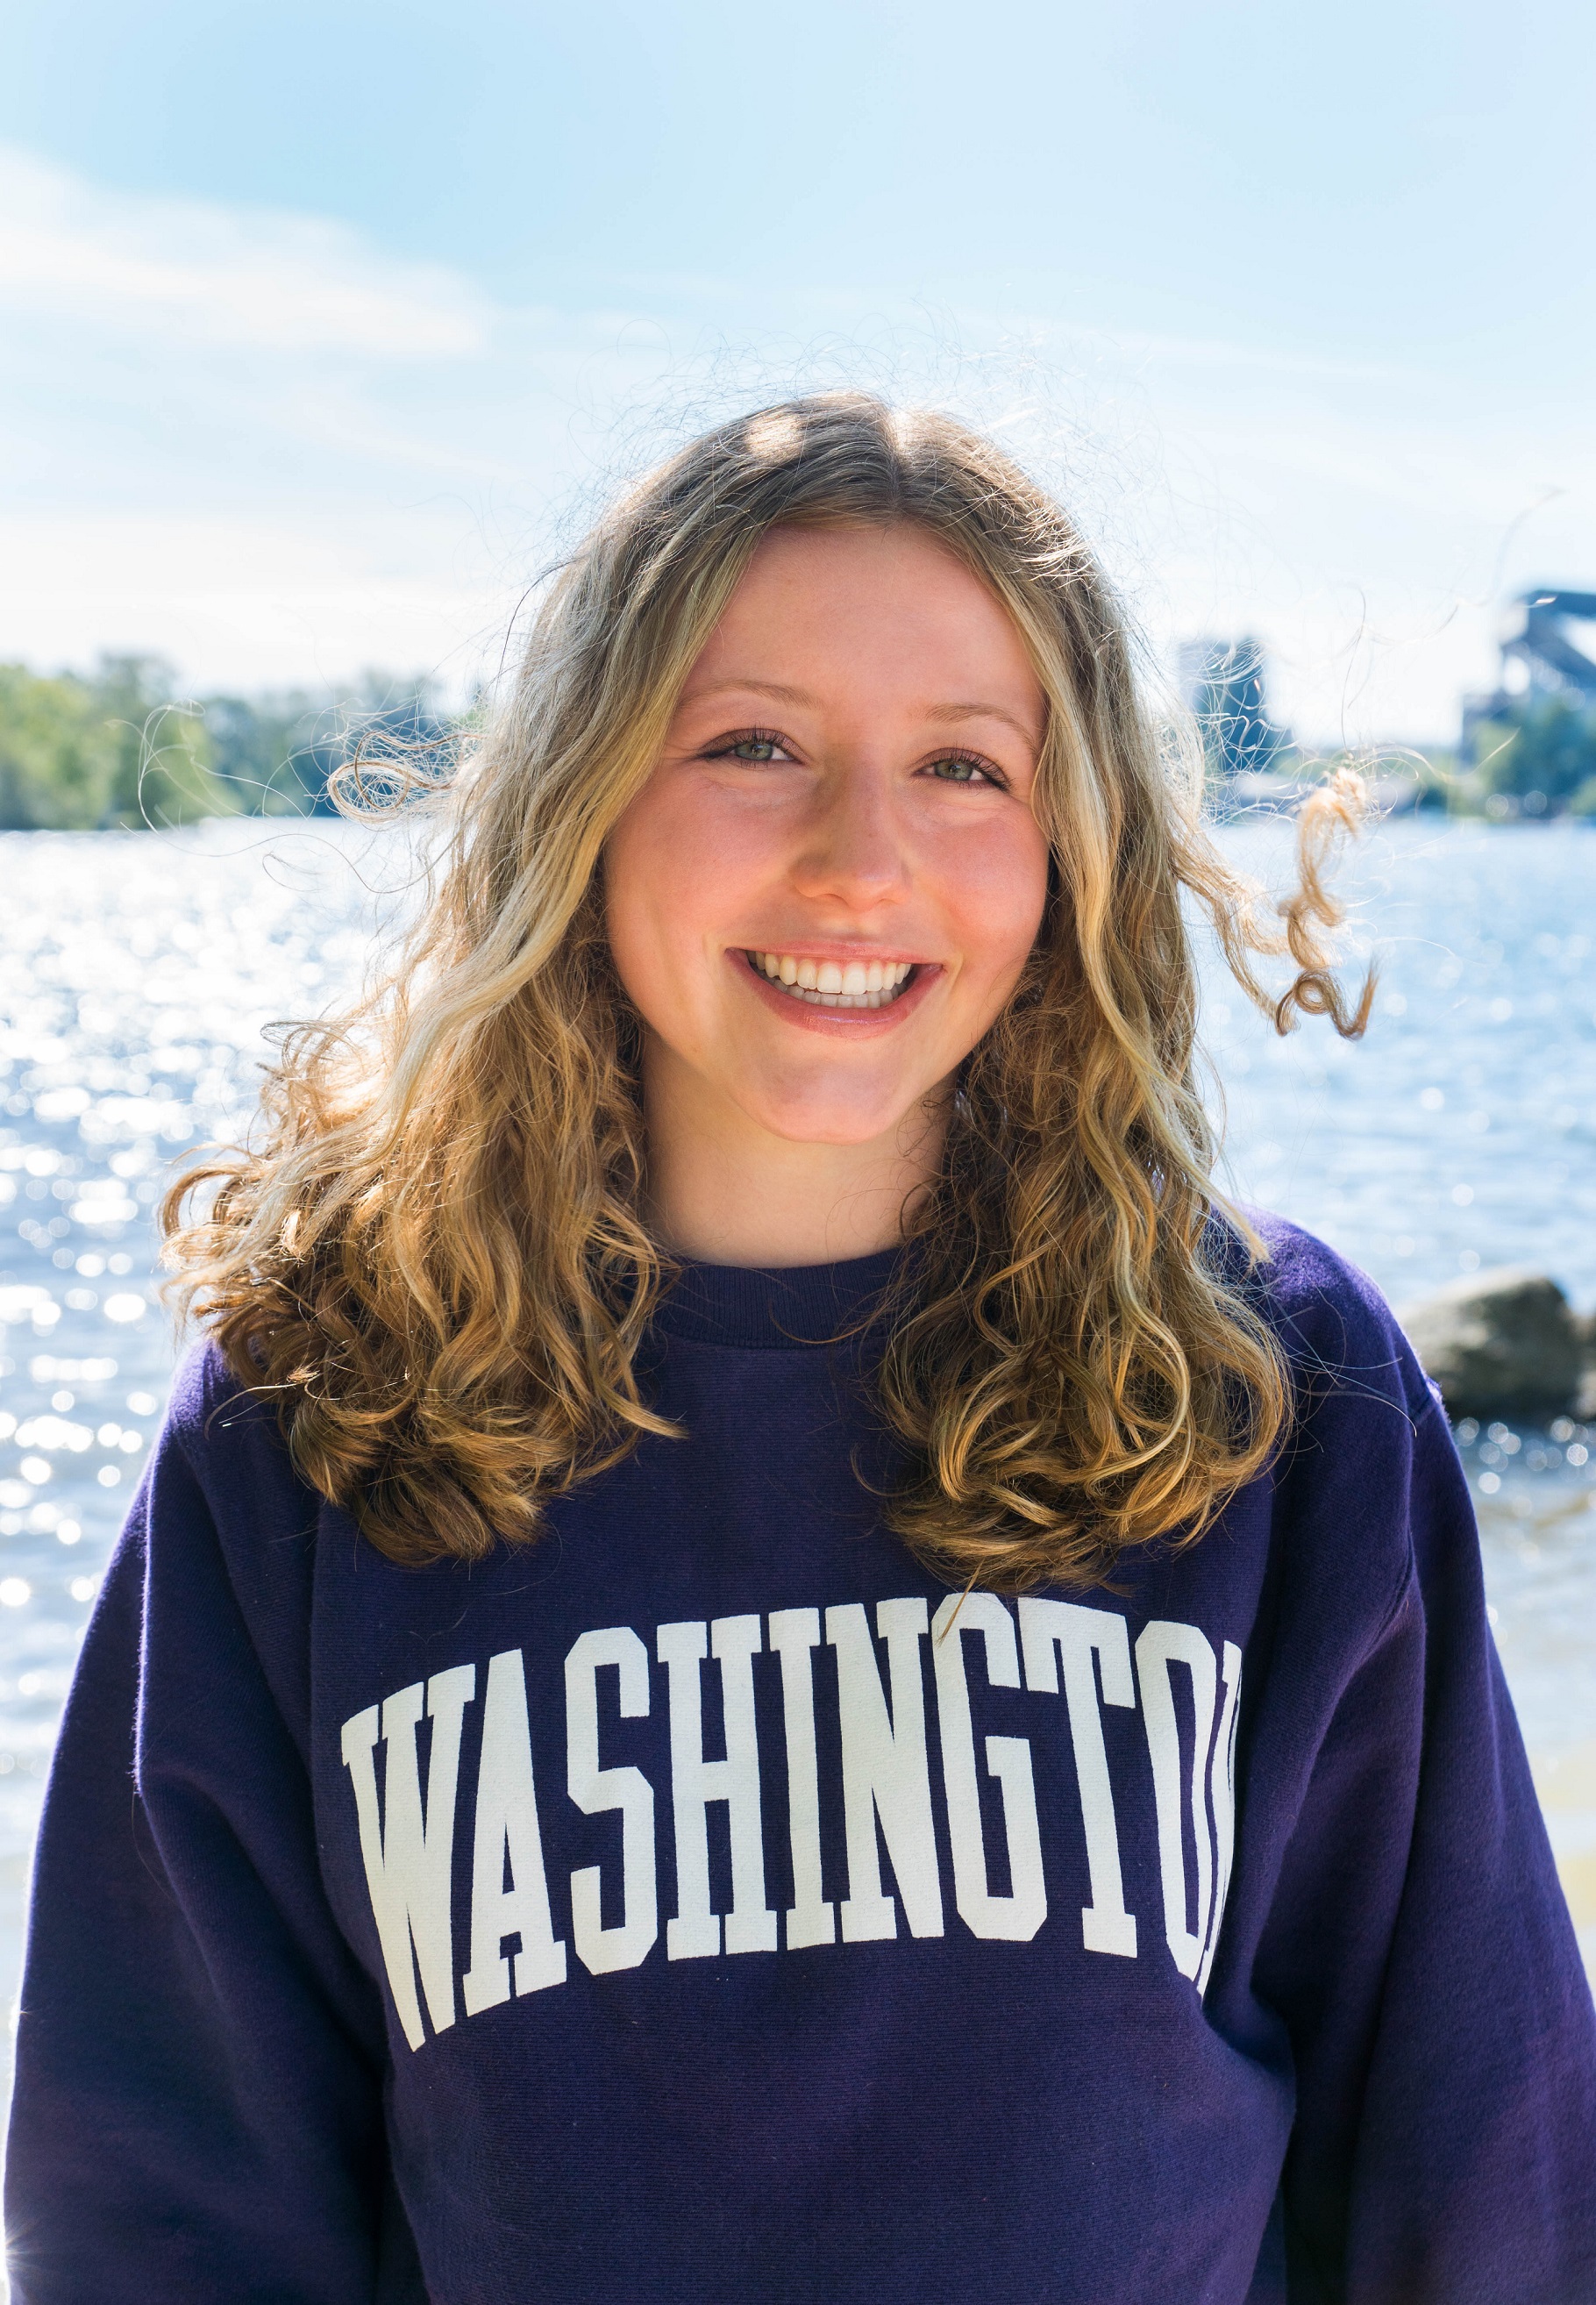 Grace has shoulder length blonde curly hair and fair skin. She is wearing a purple UW sweatshirt and is smiling in front of a body of water.